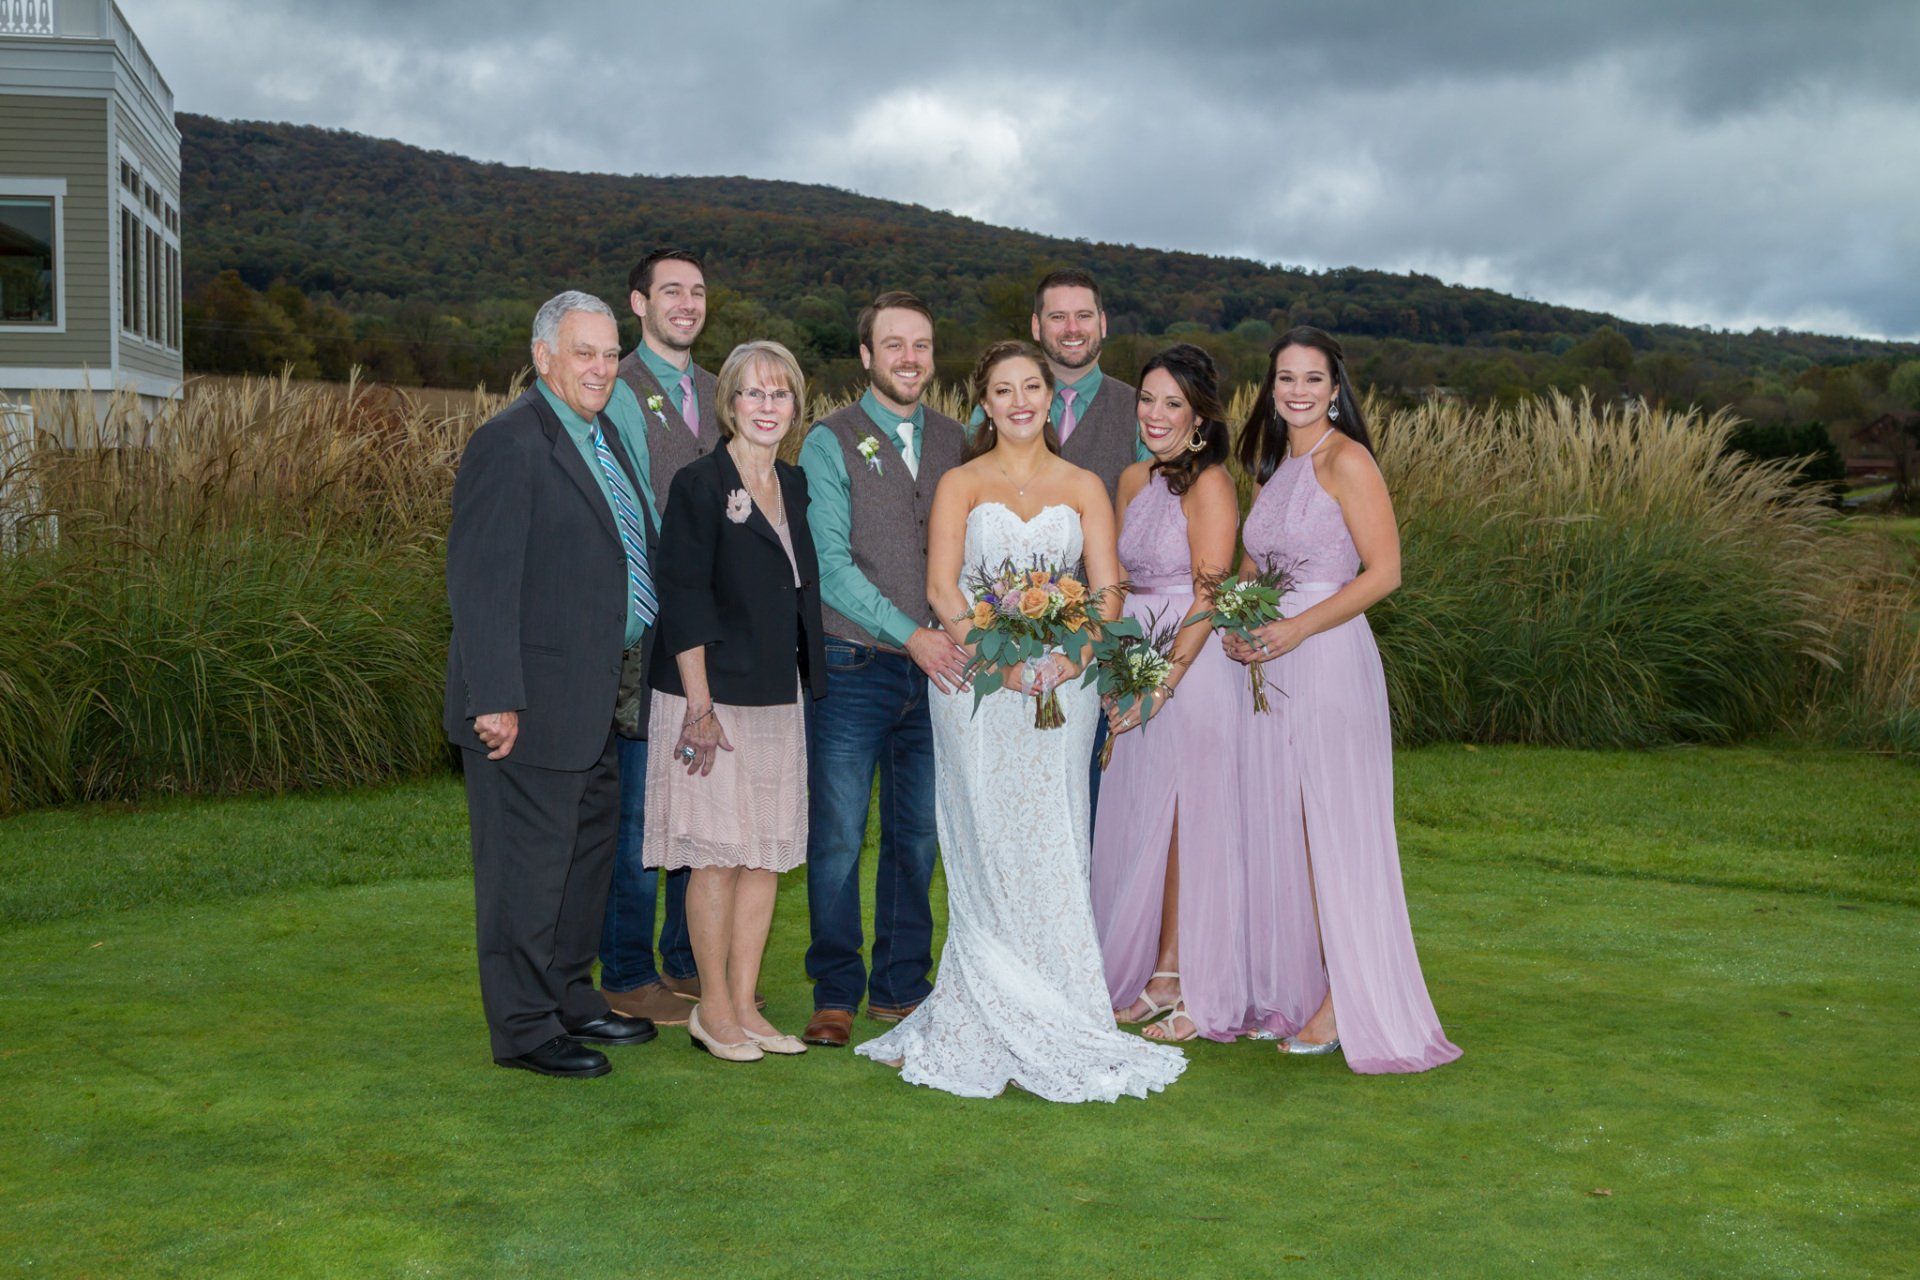 A group portrait of the bridal party on a green lawn with mountains and the venue in the background